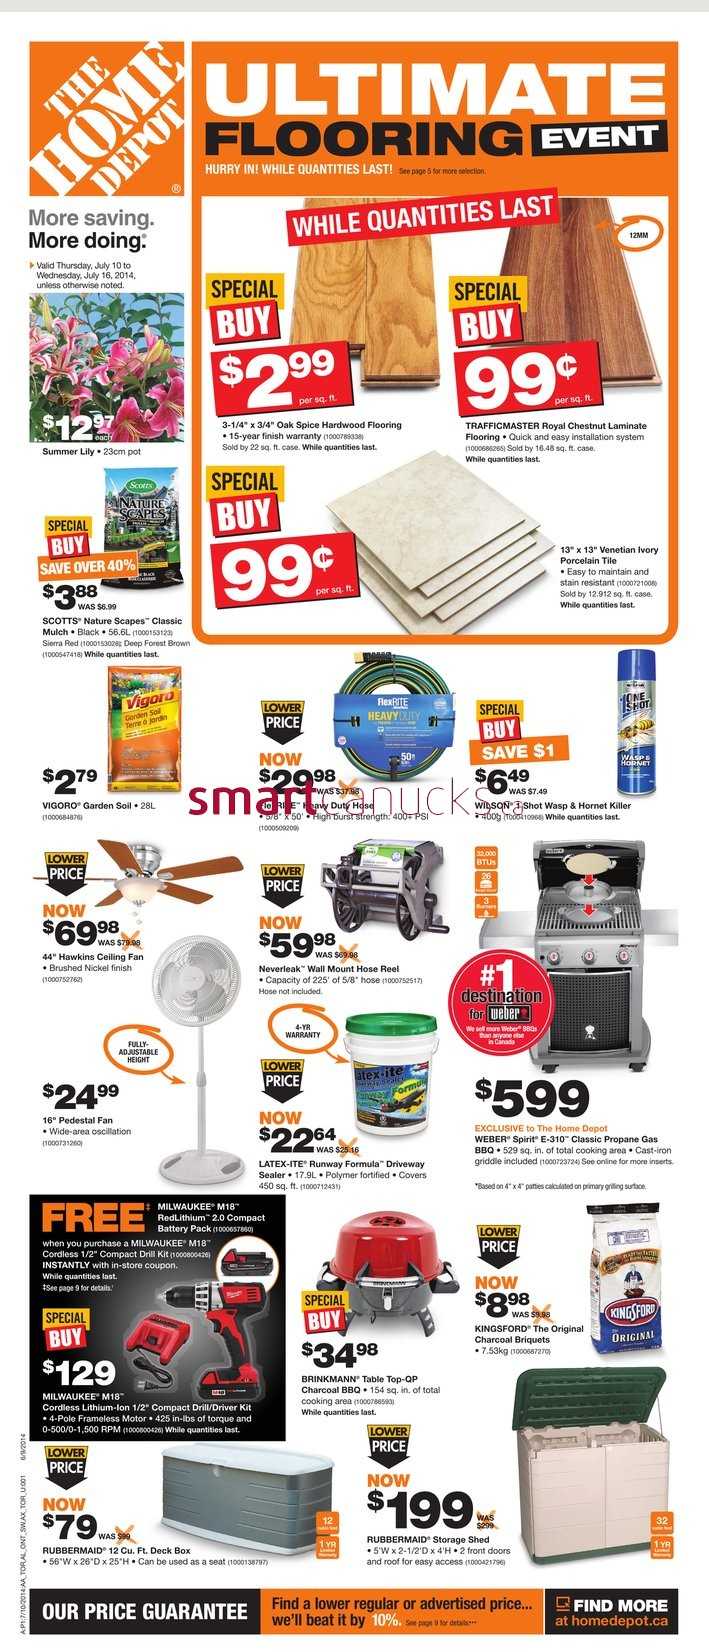 Home Depot Canada Photos and Images